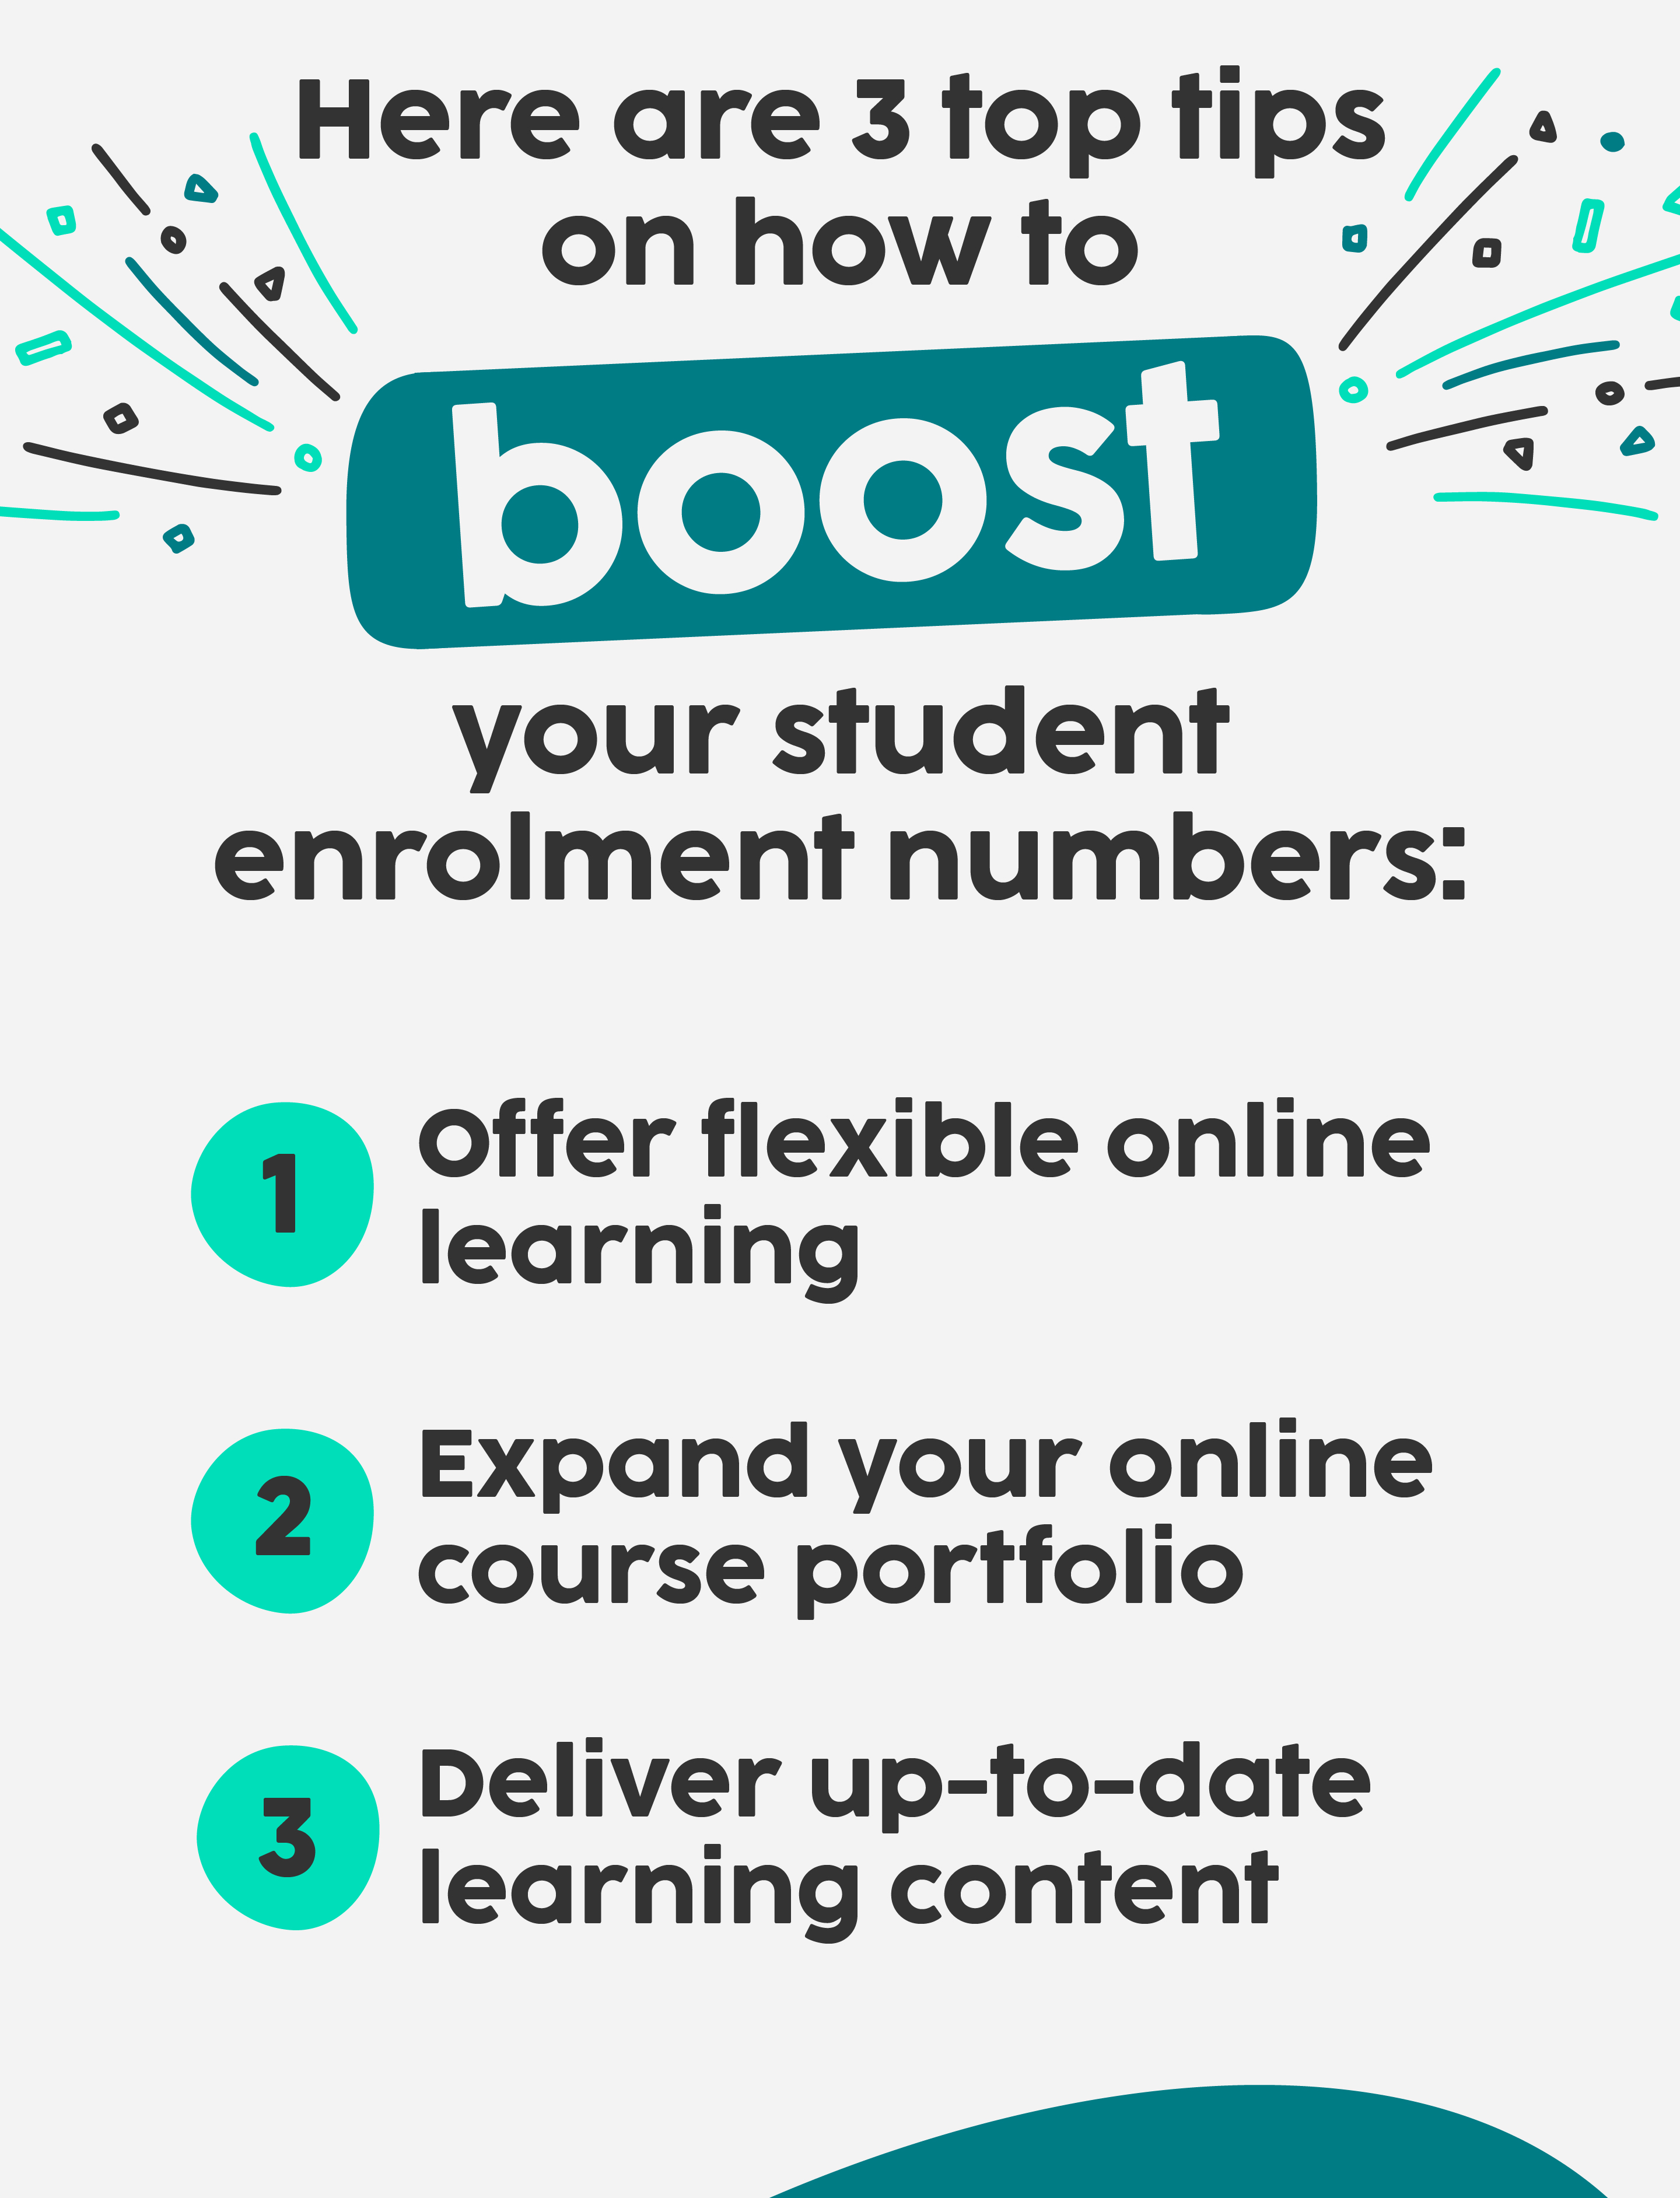 Here are 3 top tips on how to boost your student enrolment numbers 1. Offer flexible online learning  2. Expand your online course portfolio 3. Deliver up-to-date learning content